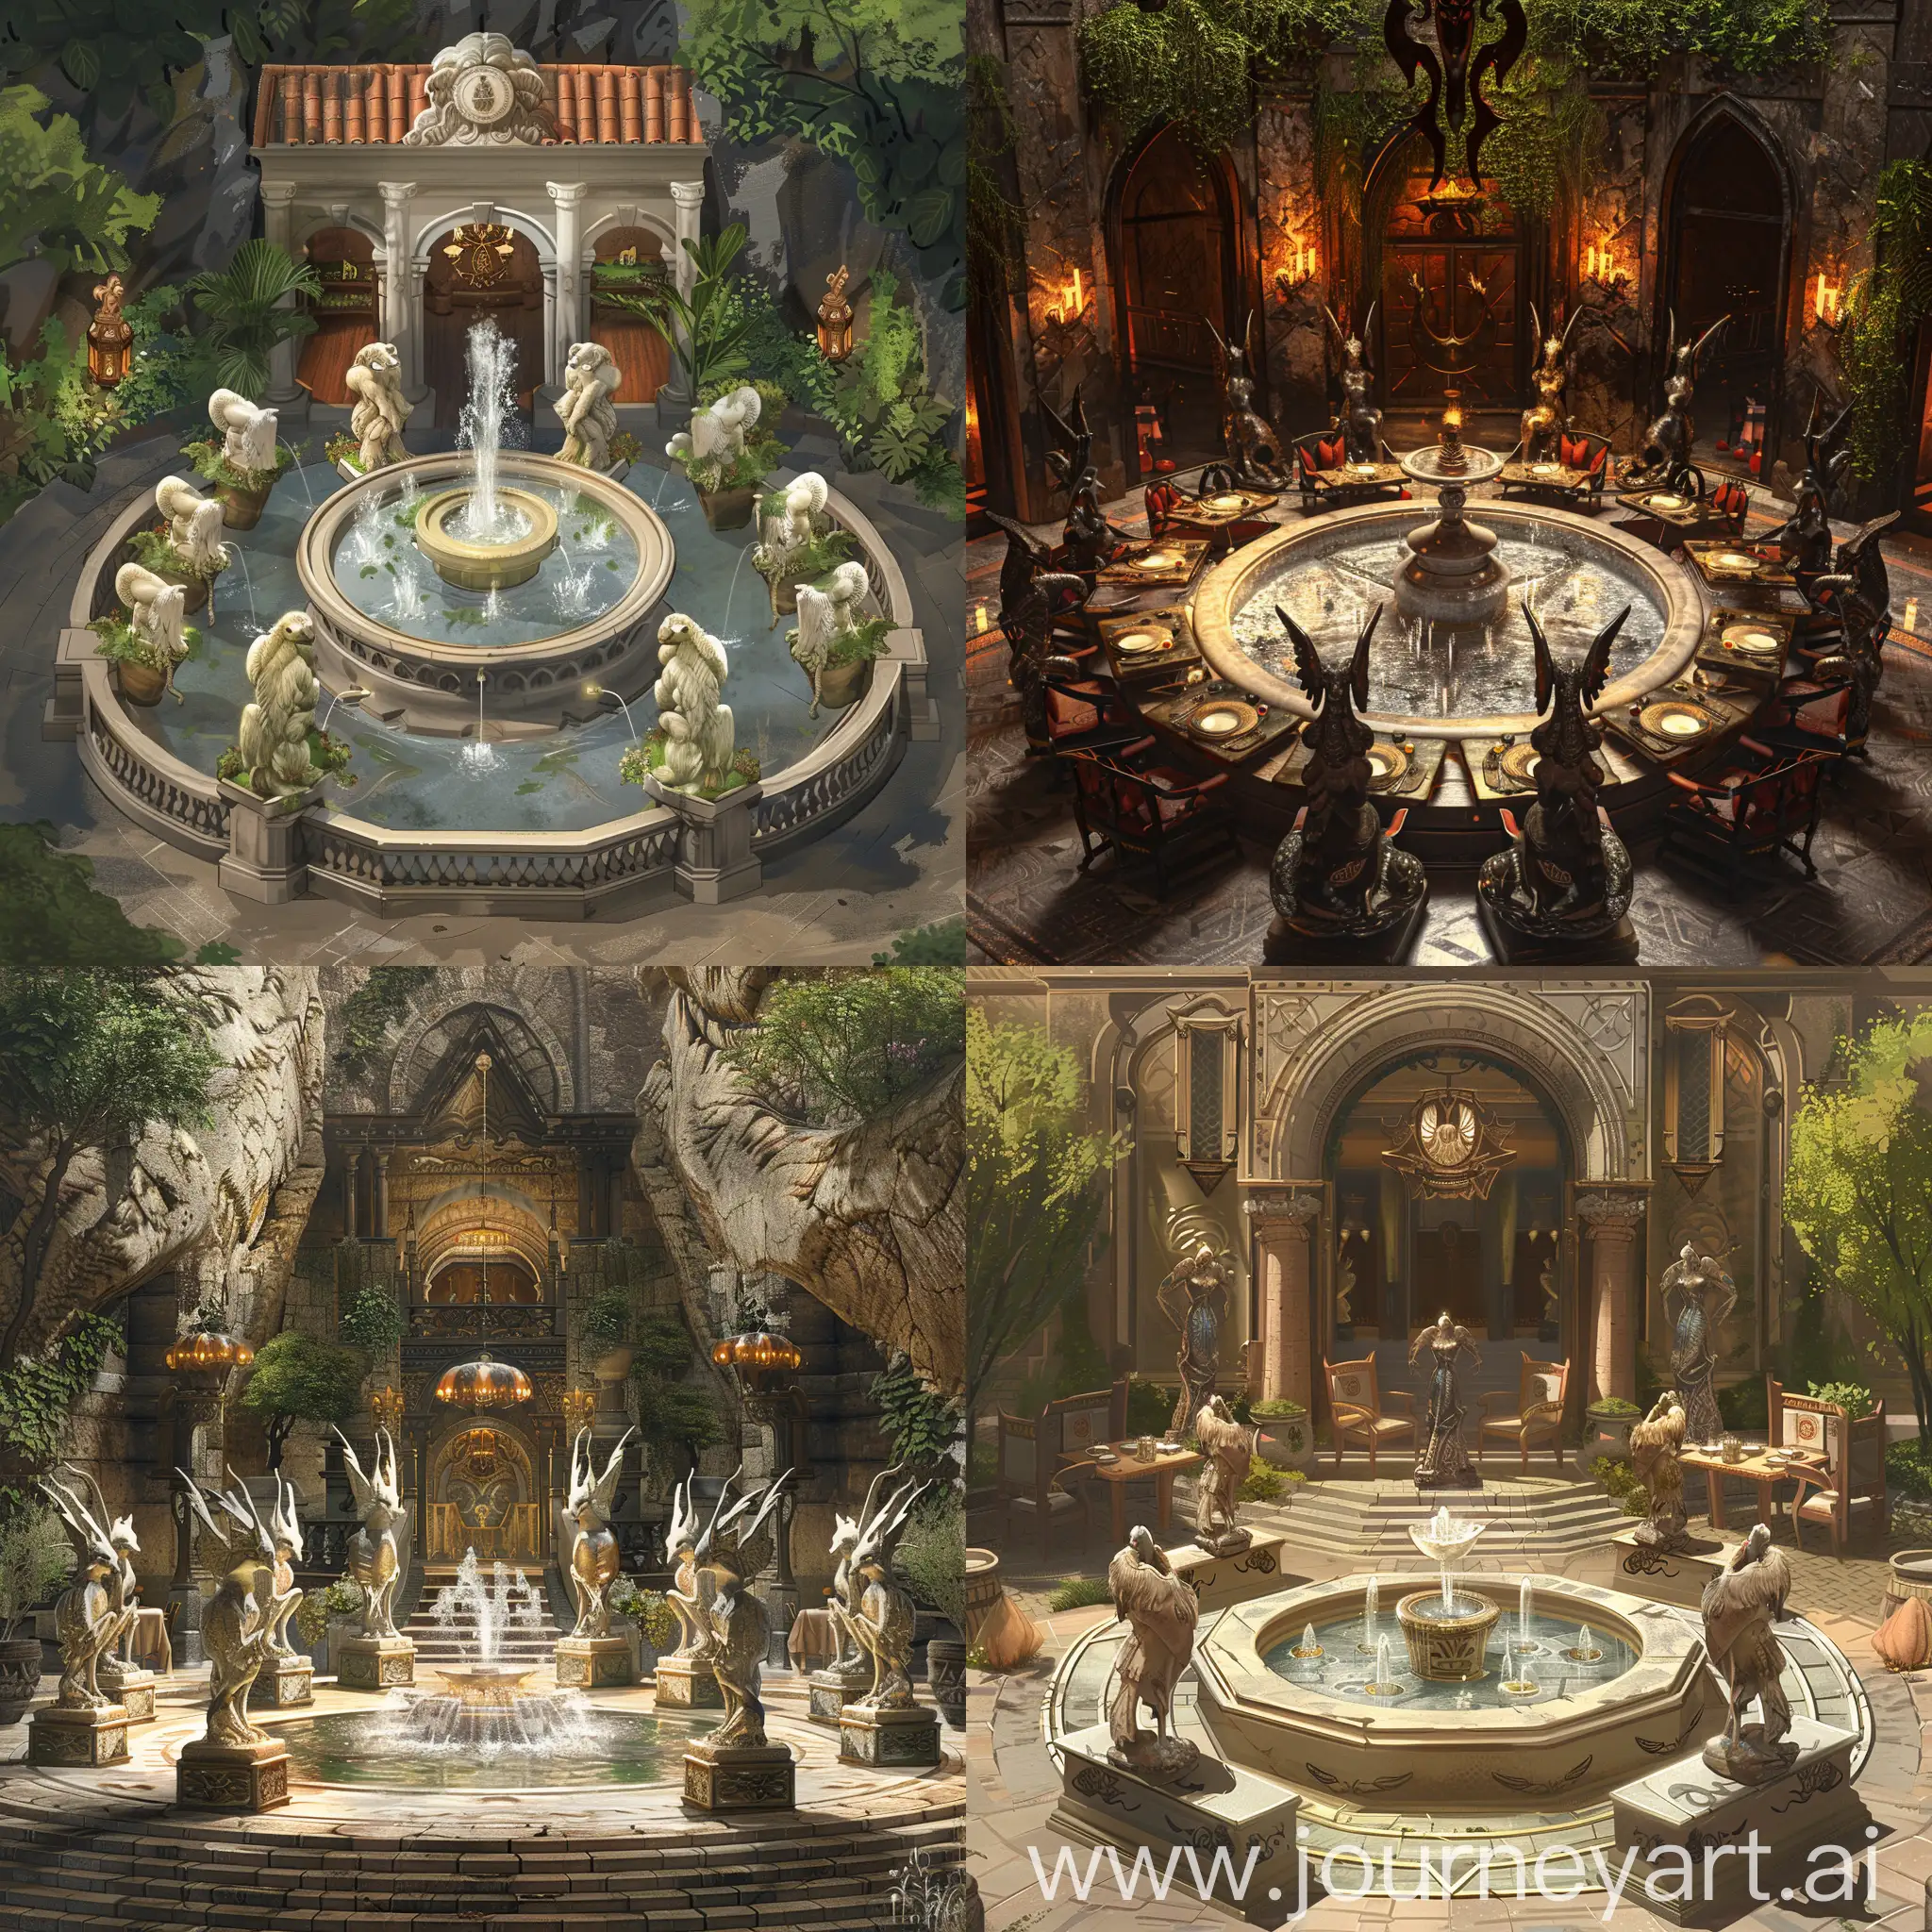 In a high end area of a Fantasy World, a luxury restaurant with an impressive entrance with 8 harpy statues around a fountain.